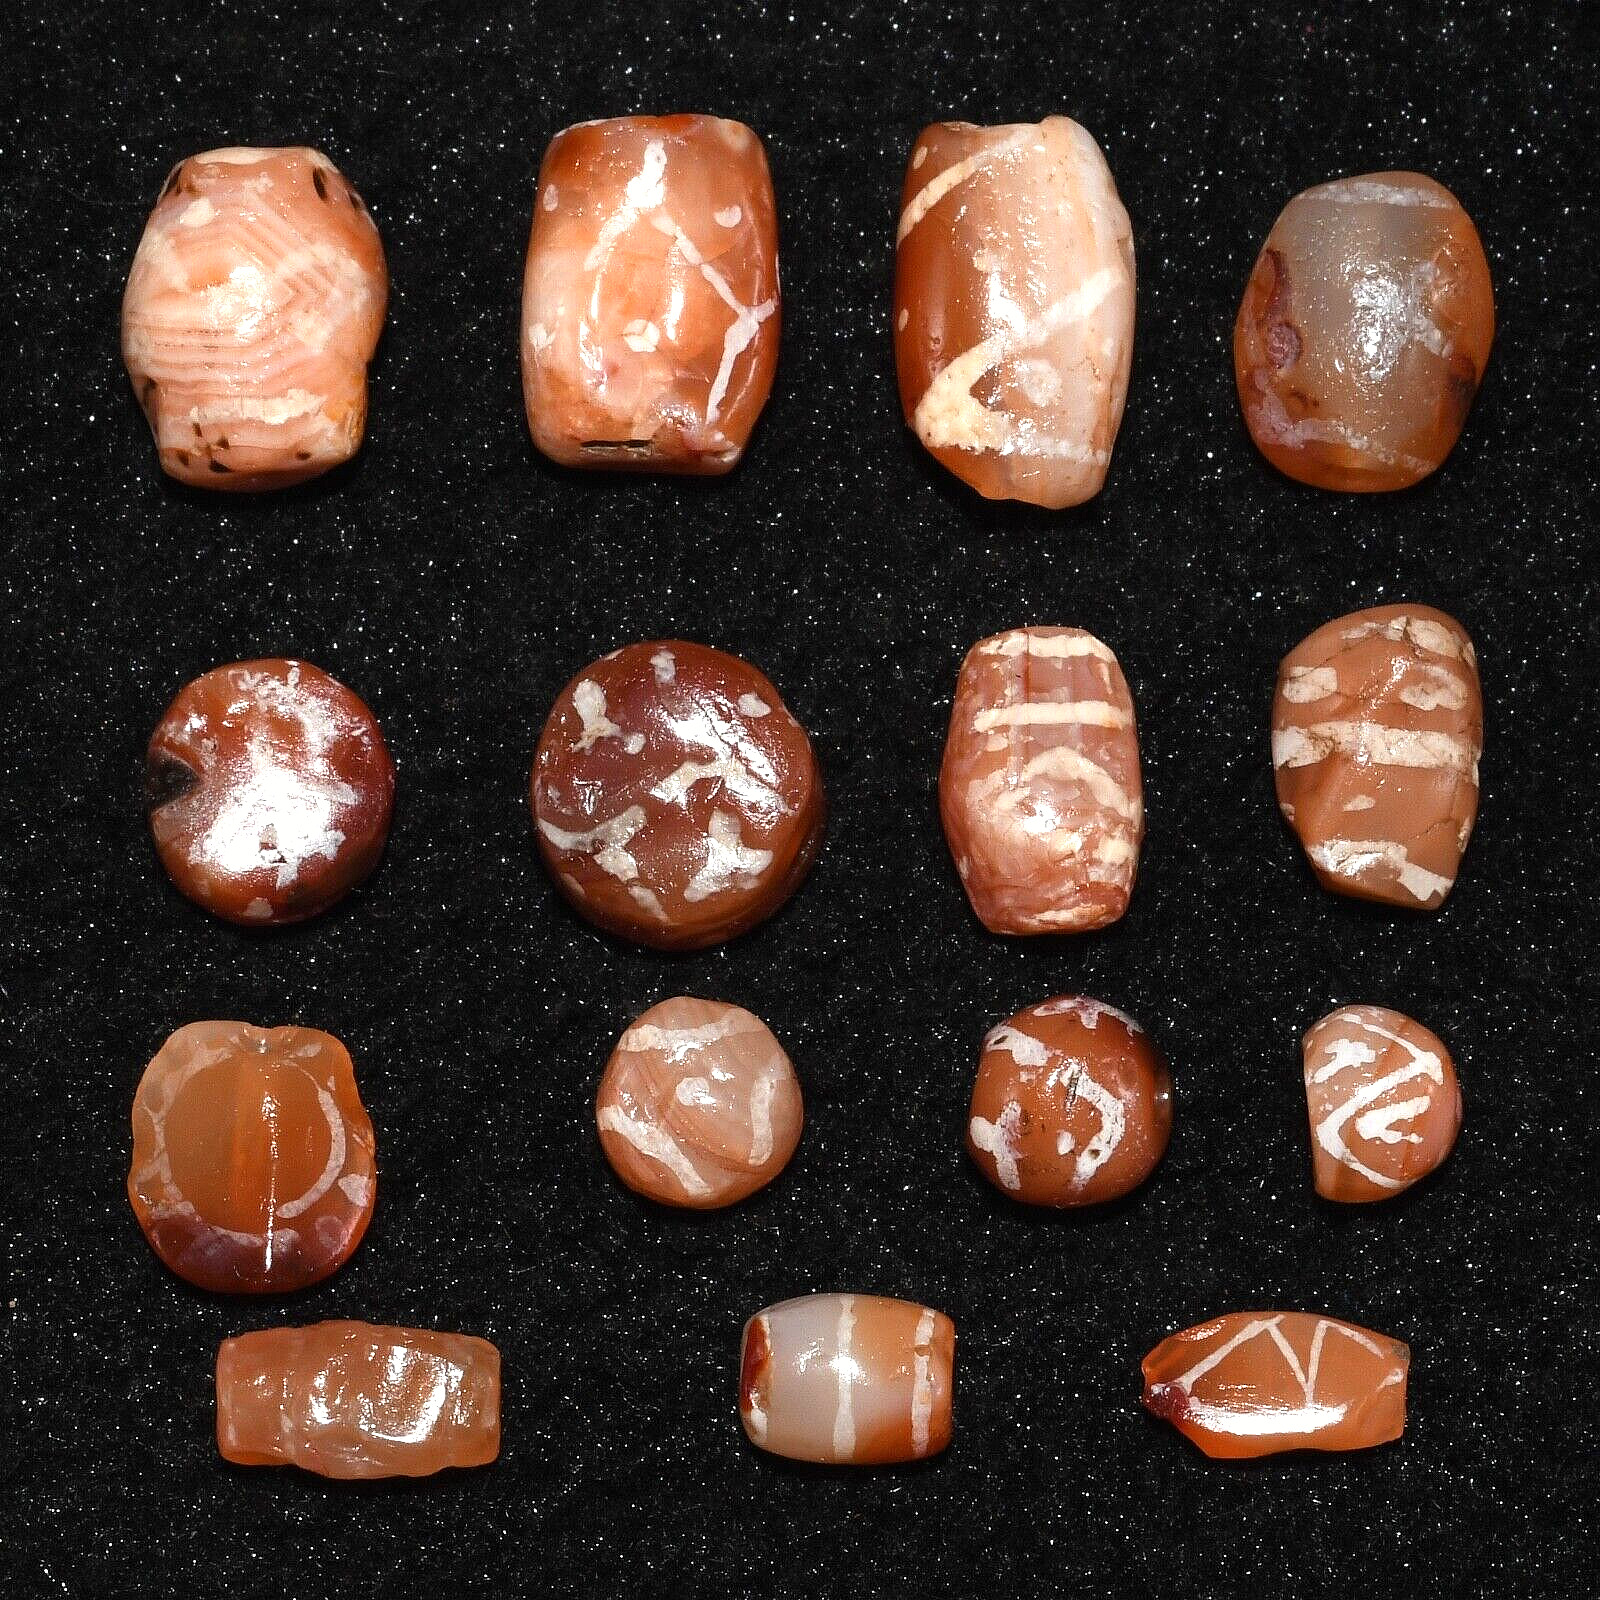 15 Ancient Etched Carnelian Beads in good Condition over 2000 Years Old